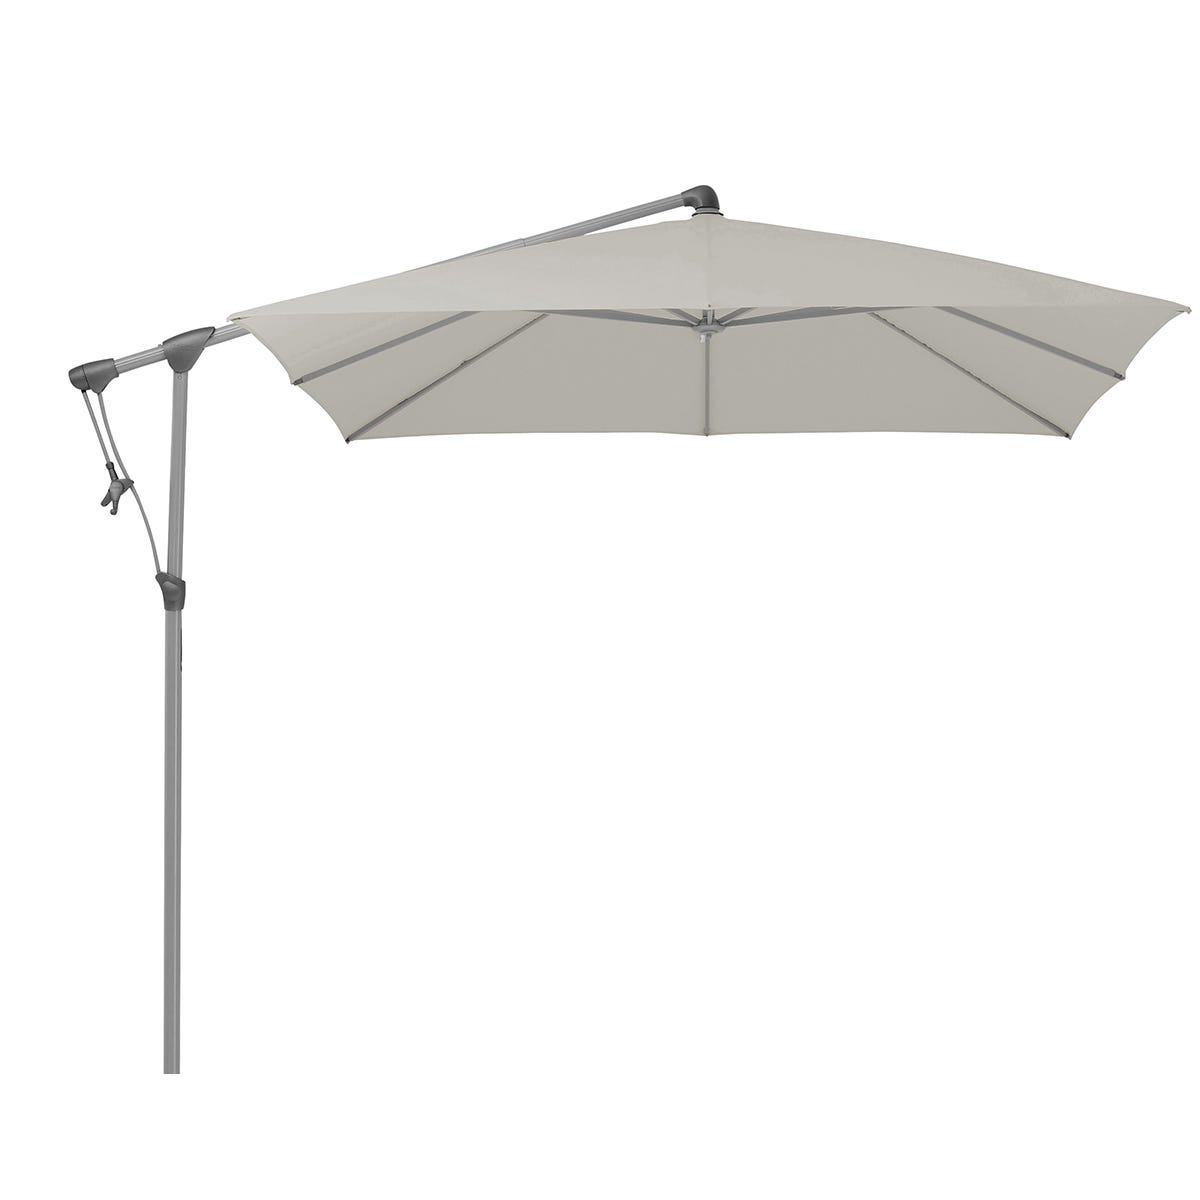 Glatz Sunwing 2.6 x 2.6m Square Class 2 Parasol (base not included) - Taupe/Ash 151